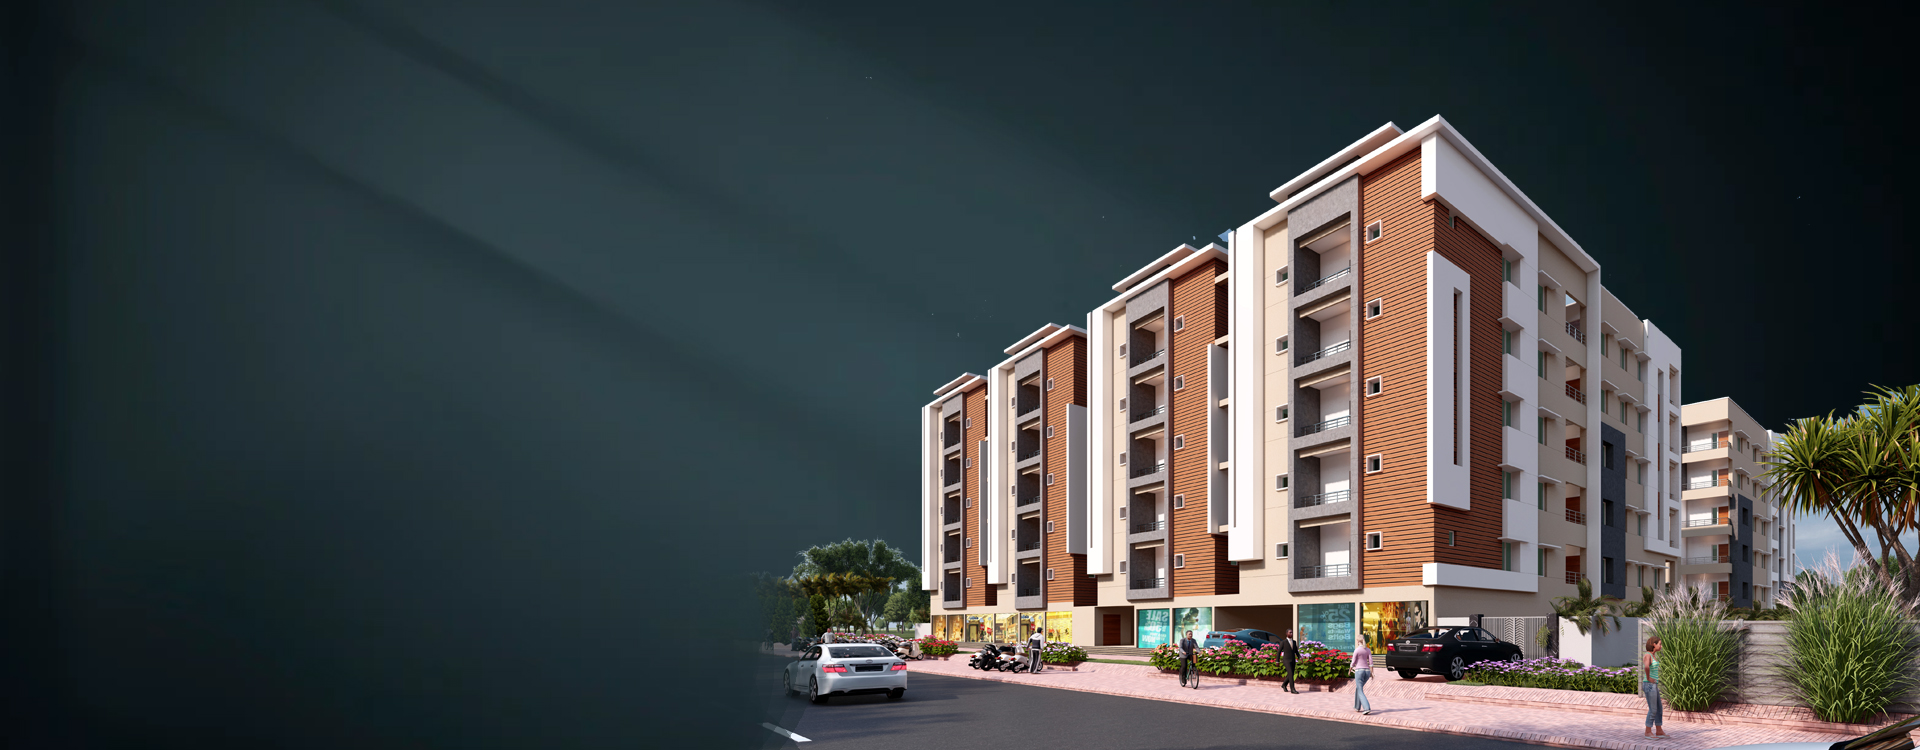 2 and 3 bhk apartments for sale in warangal